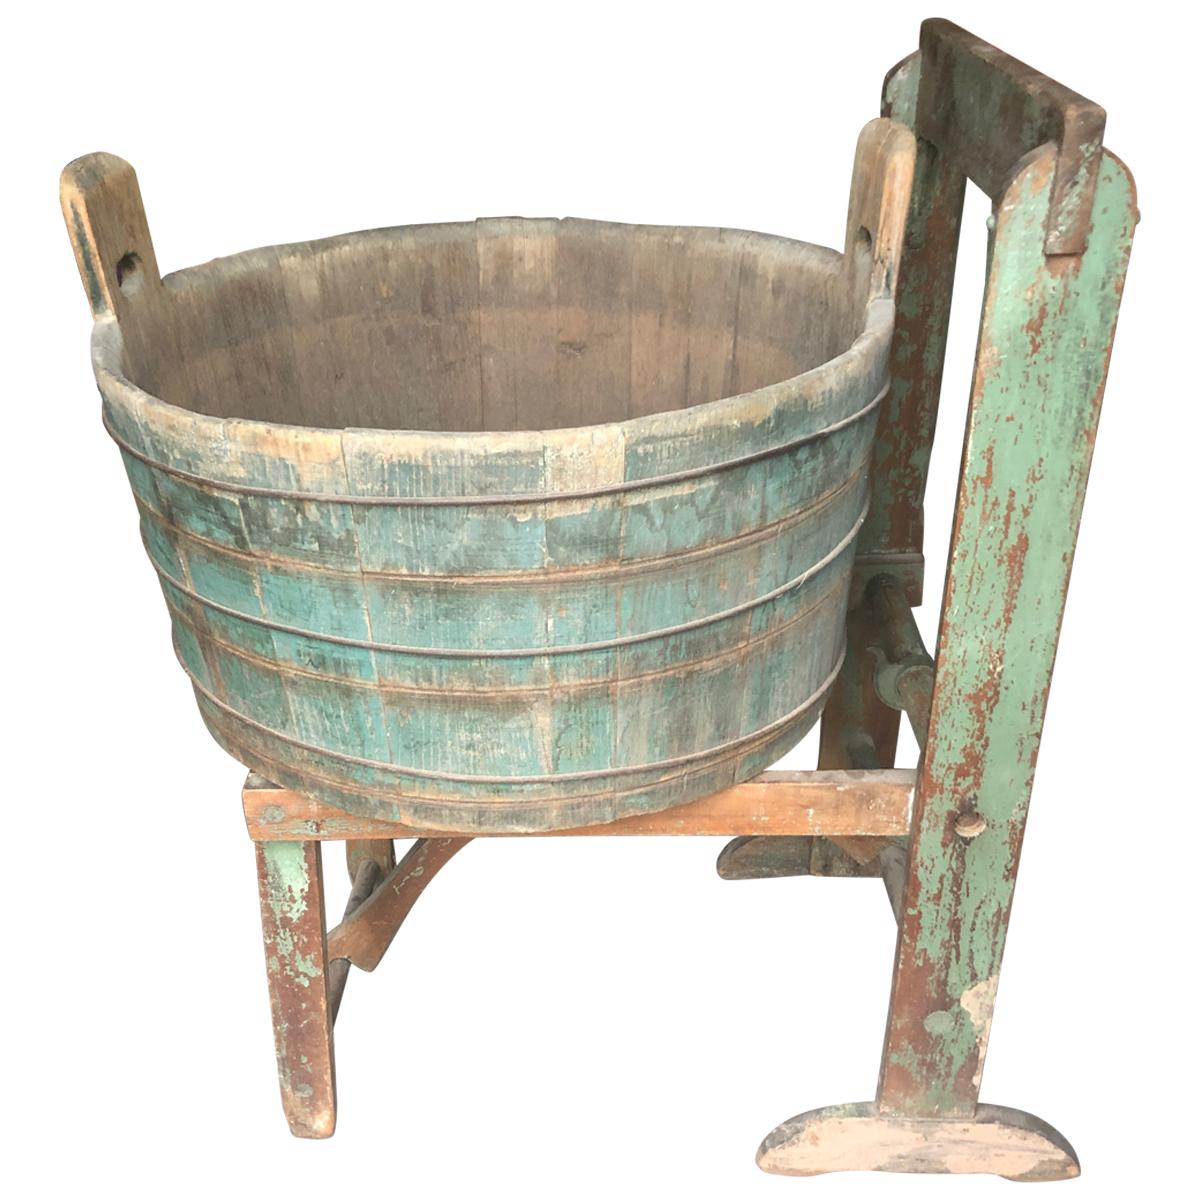 Authentic Distressed Country Washing Barrel Tub and Stand For Sale